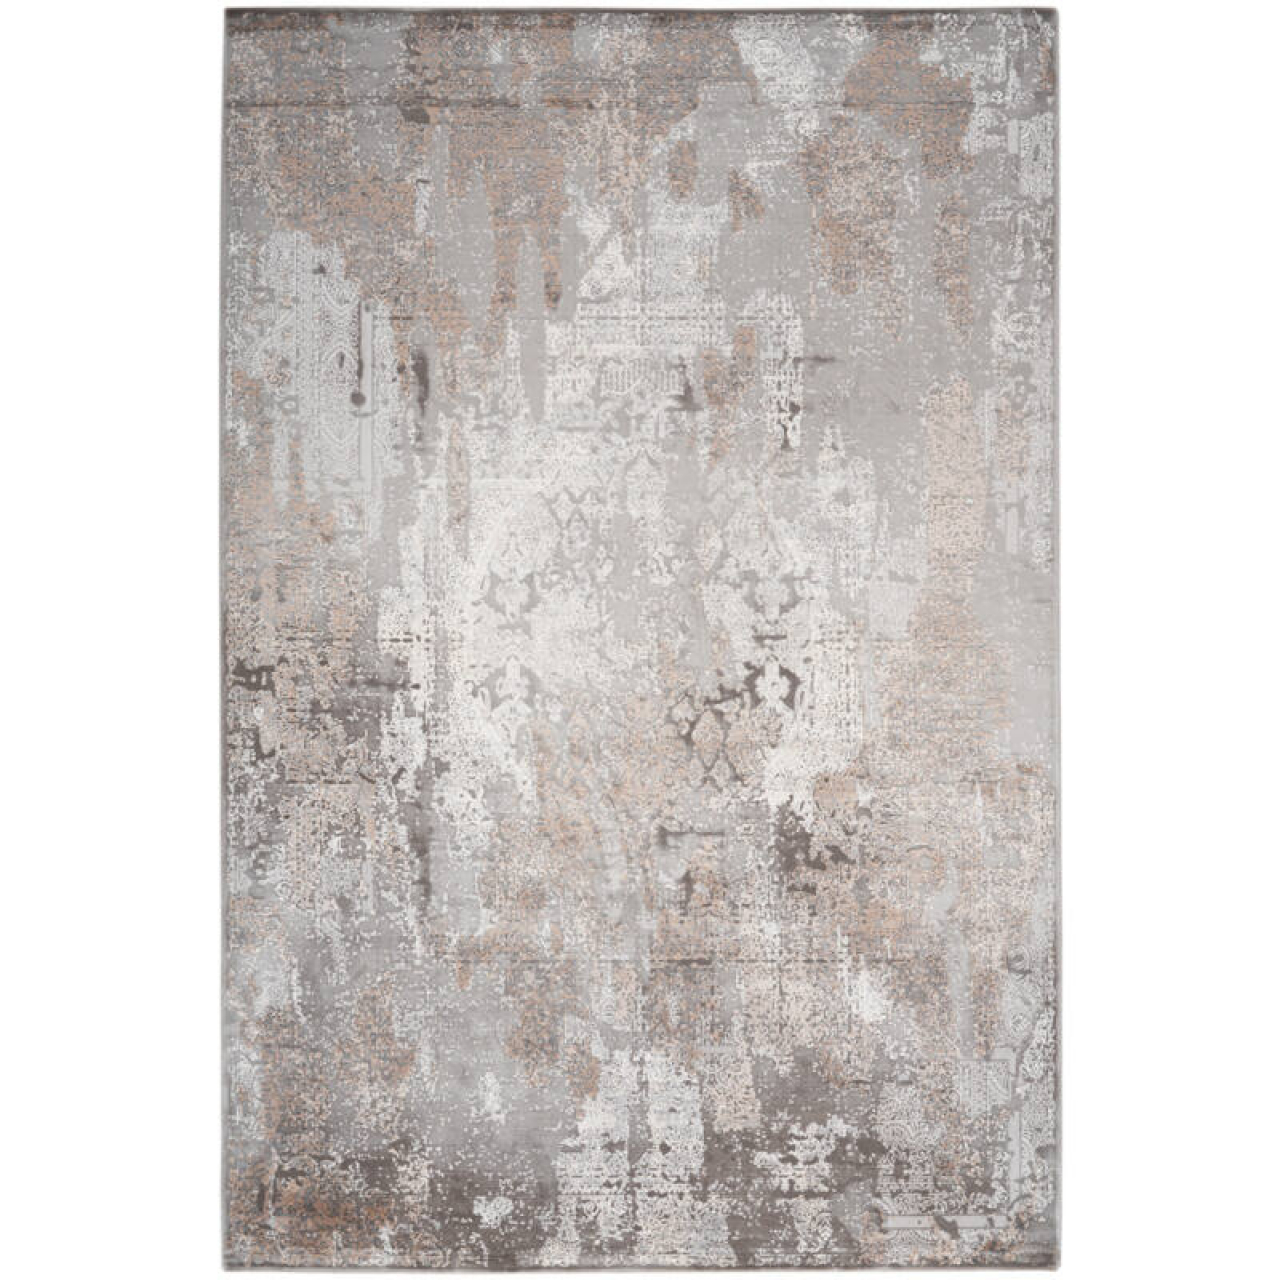 Obsession Haute Couture Jewel 951 Taupe szőnyeg-80x150